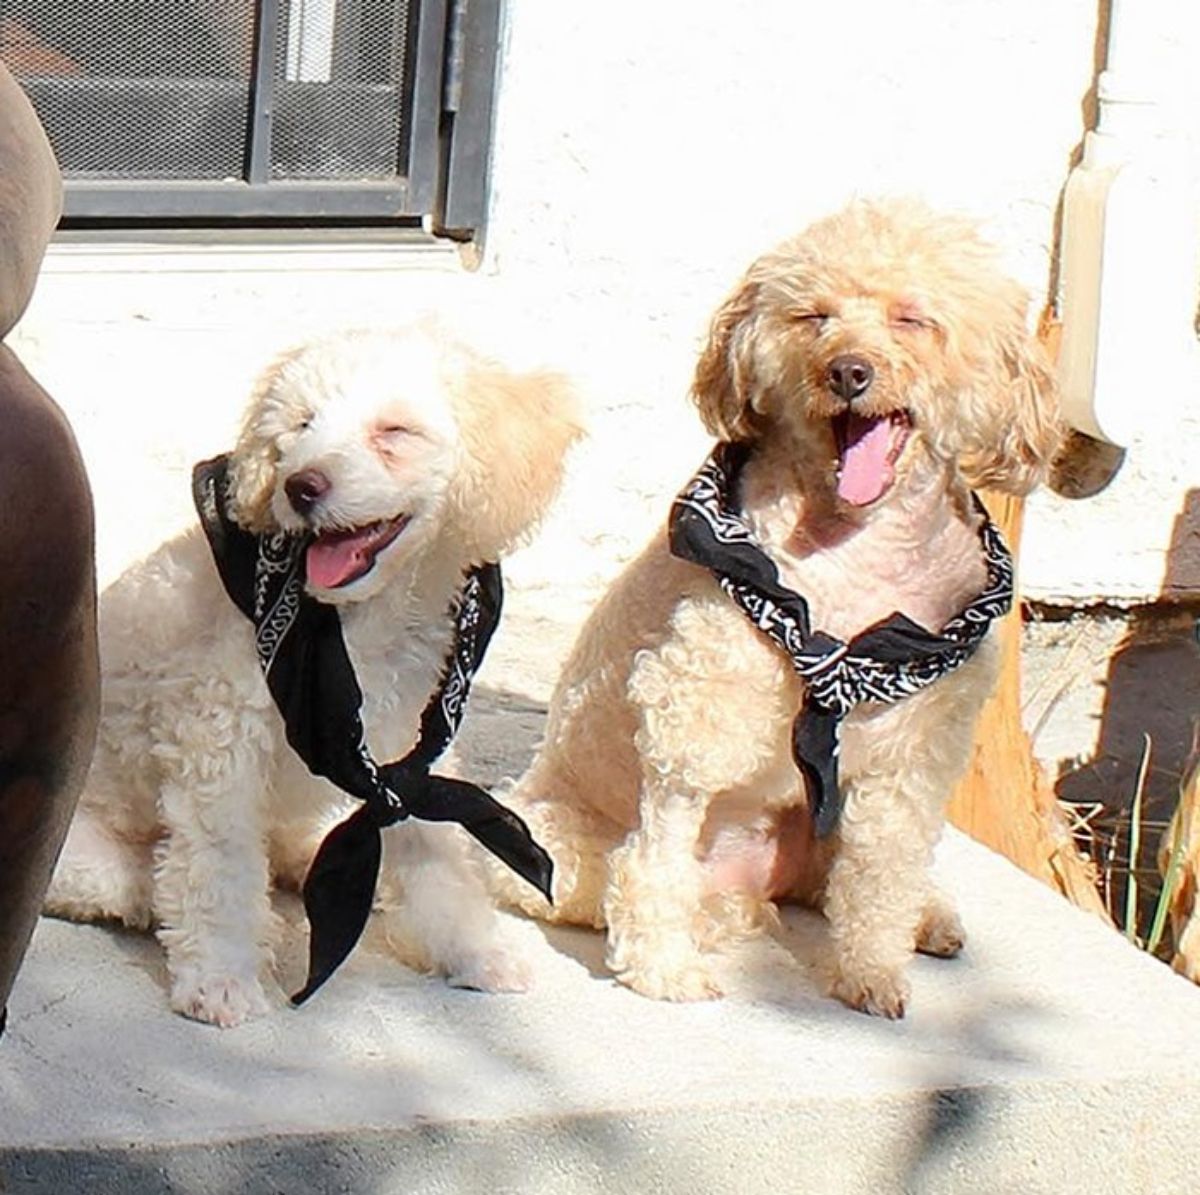 a smiling white curly dog and a smiling curly brown dog wearing black and white bandanas tied around their necks